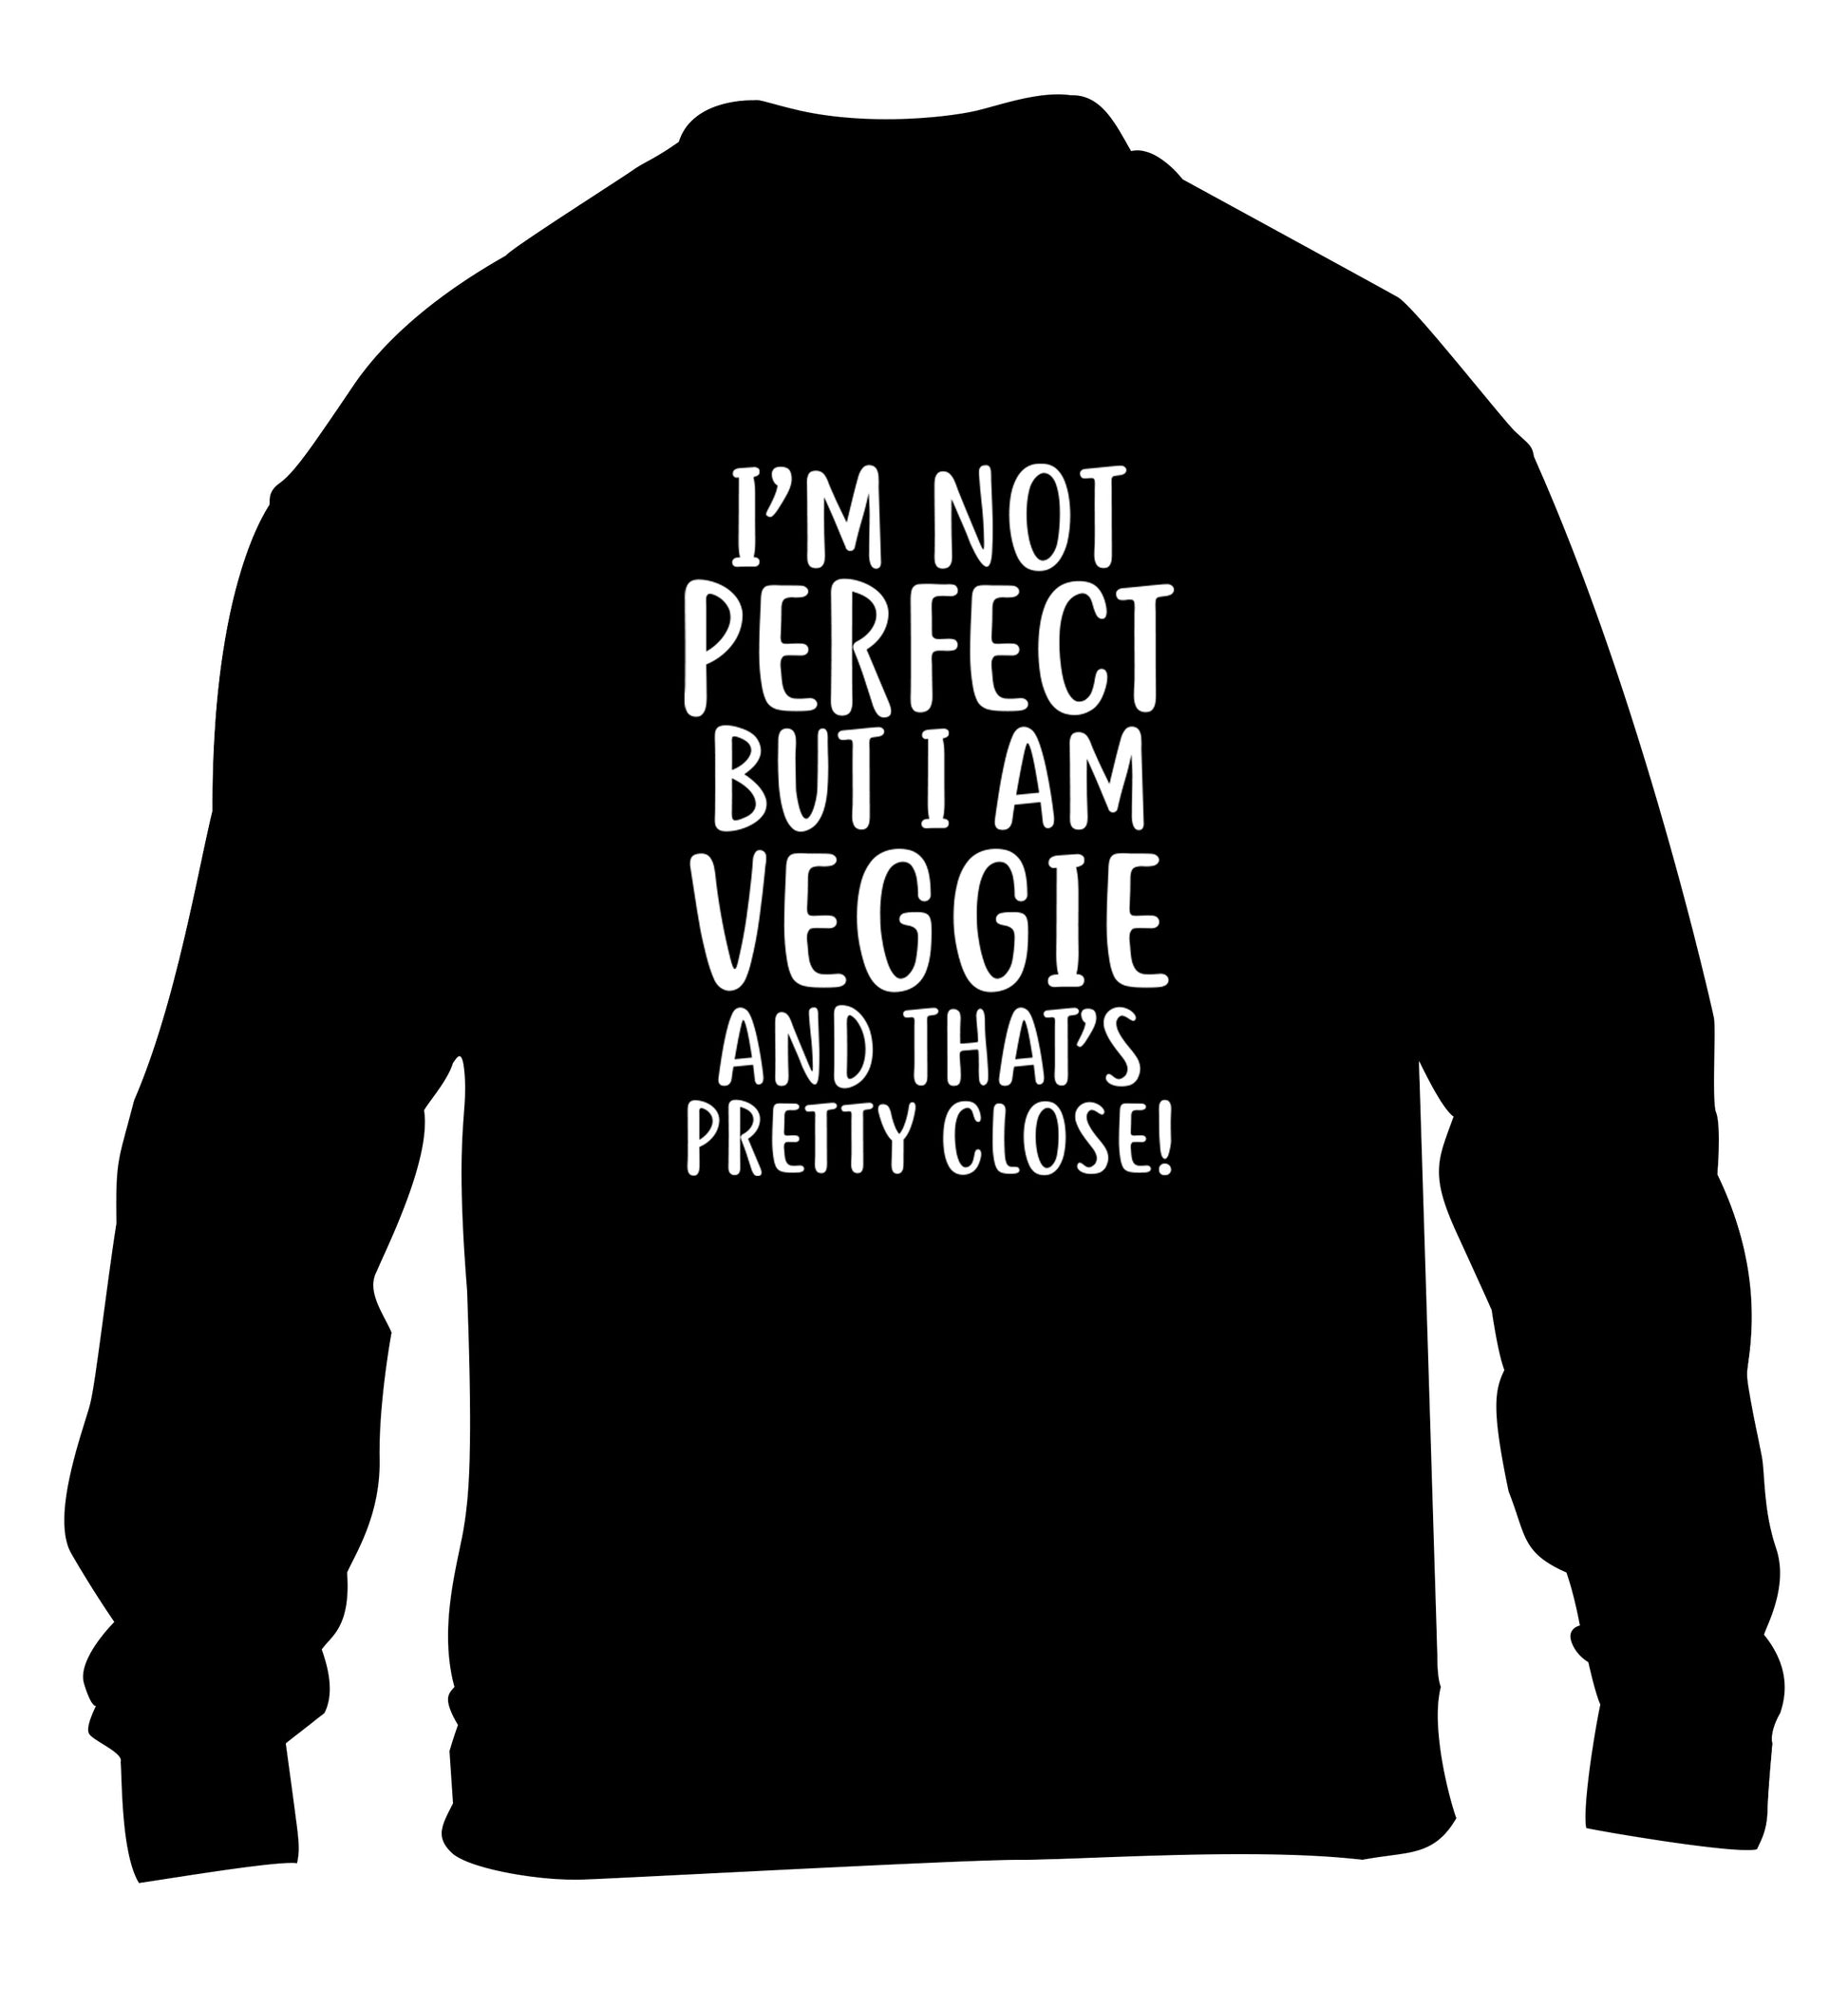 Might not be perfect but I am veggie children's black sweater 12-13 Years